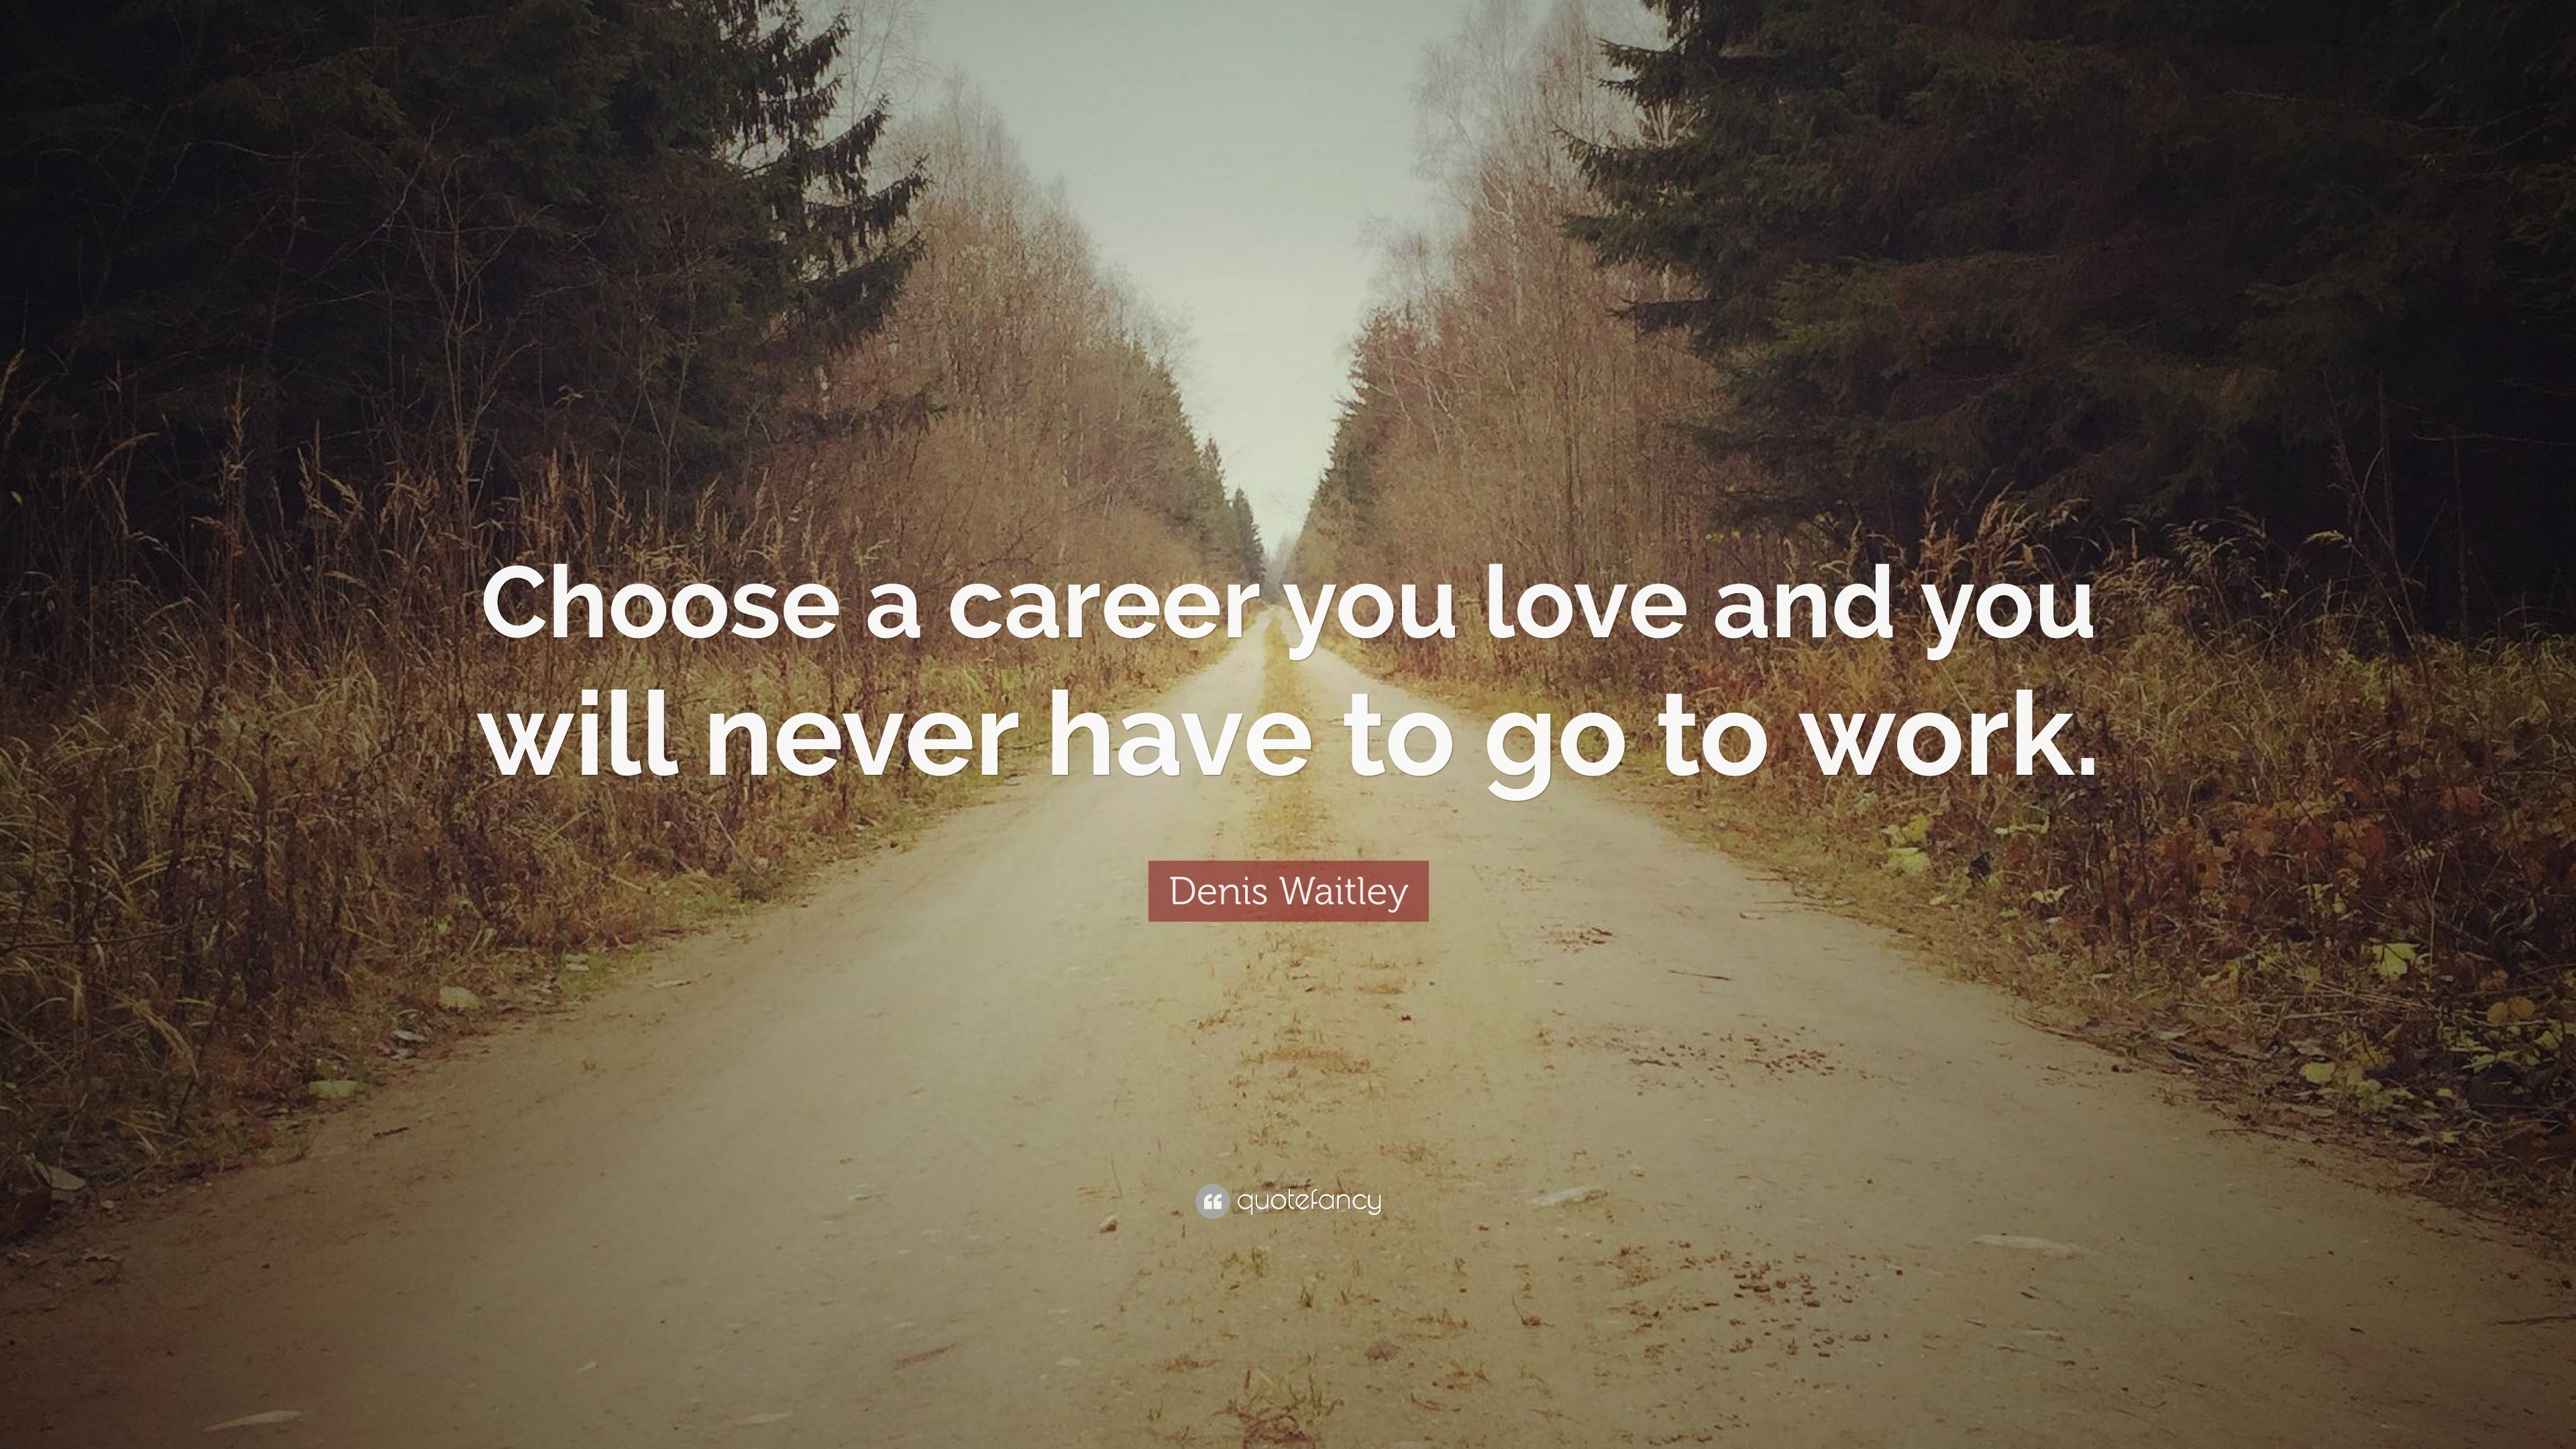 Denis Waitley Quote “choose A Career You Love And You Will Never Have To Go To Work”